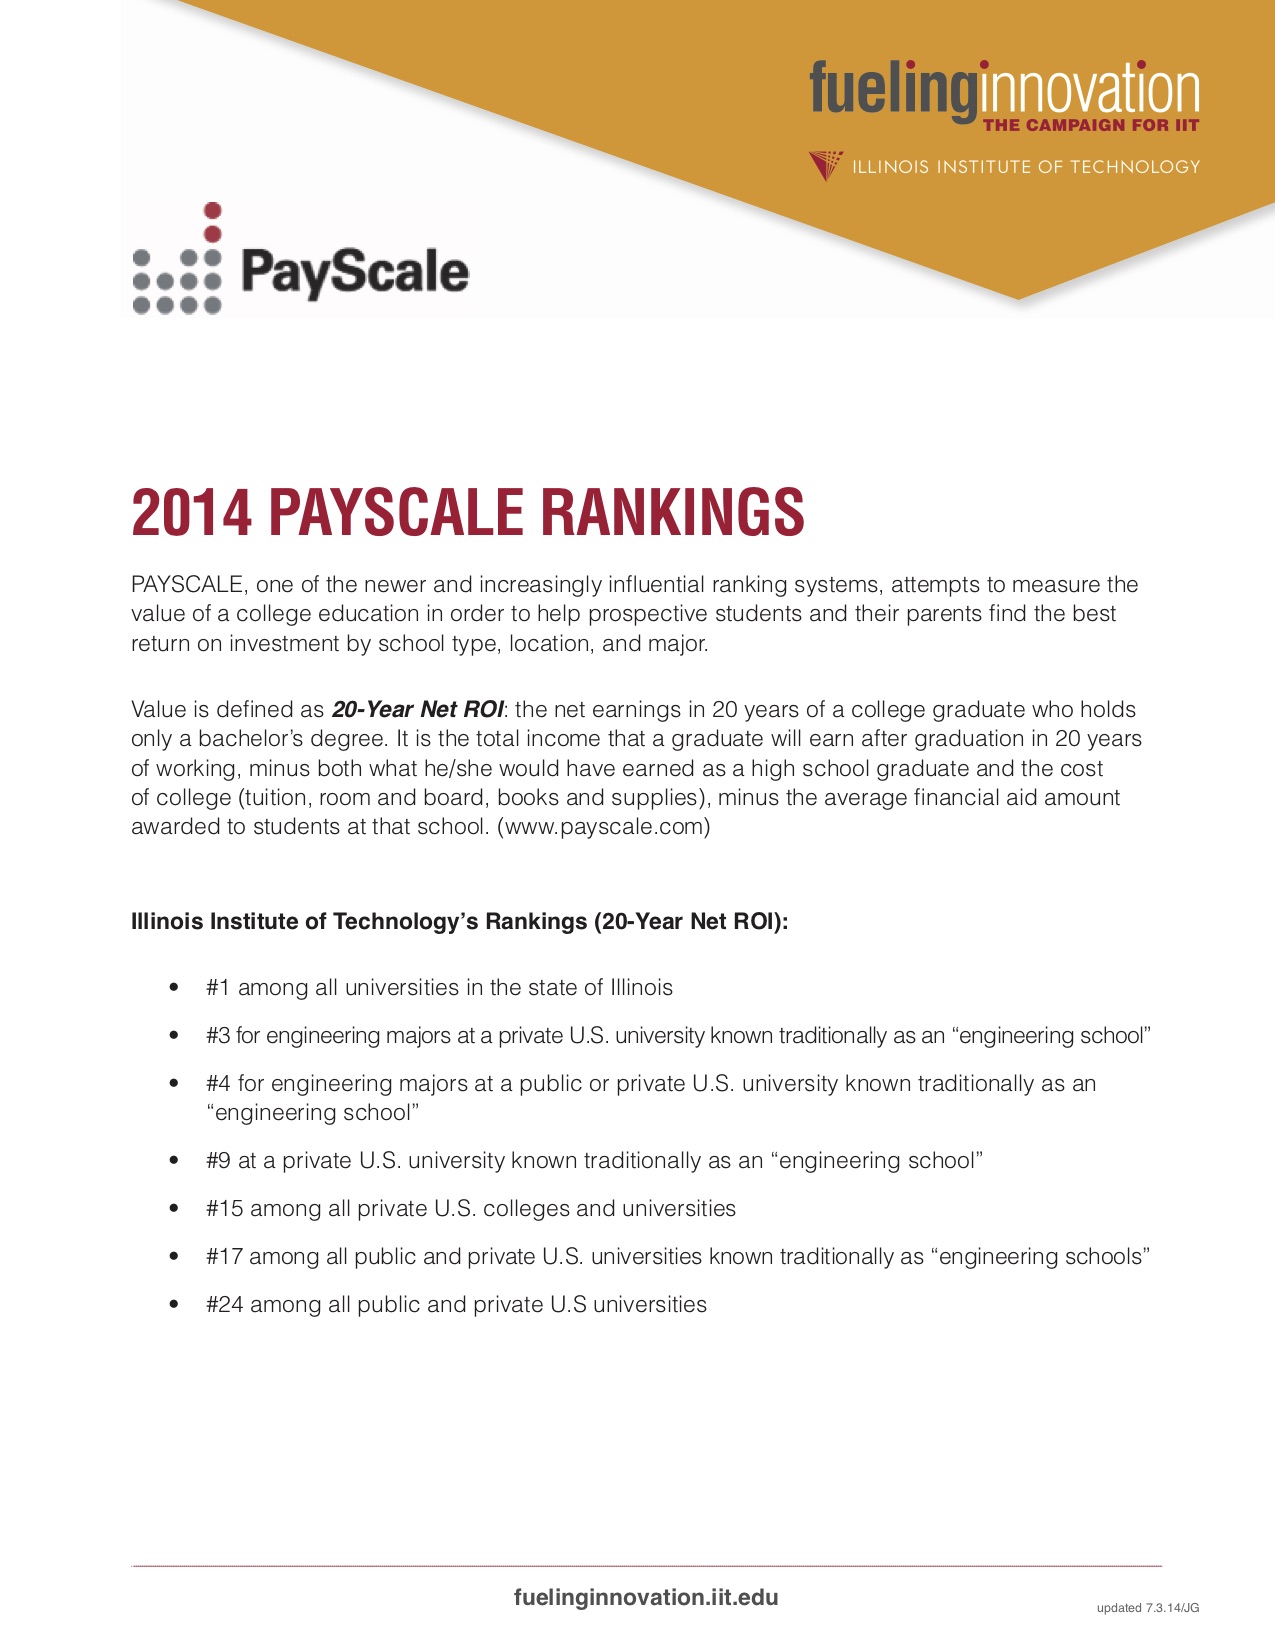 Before 5 - PayScale